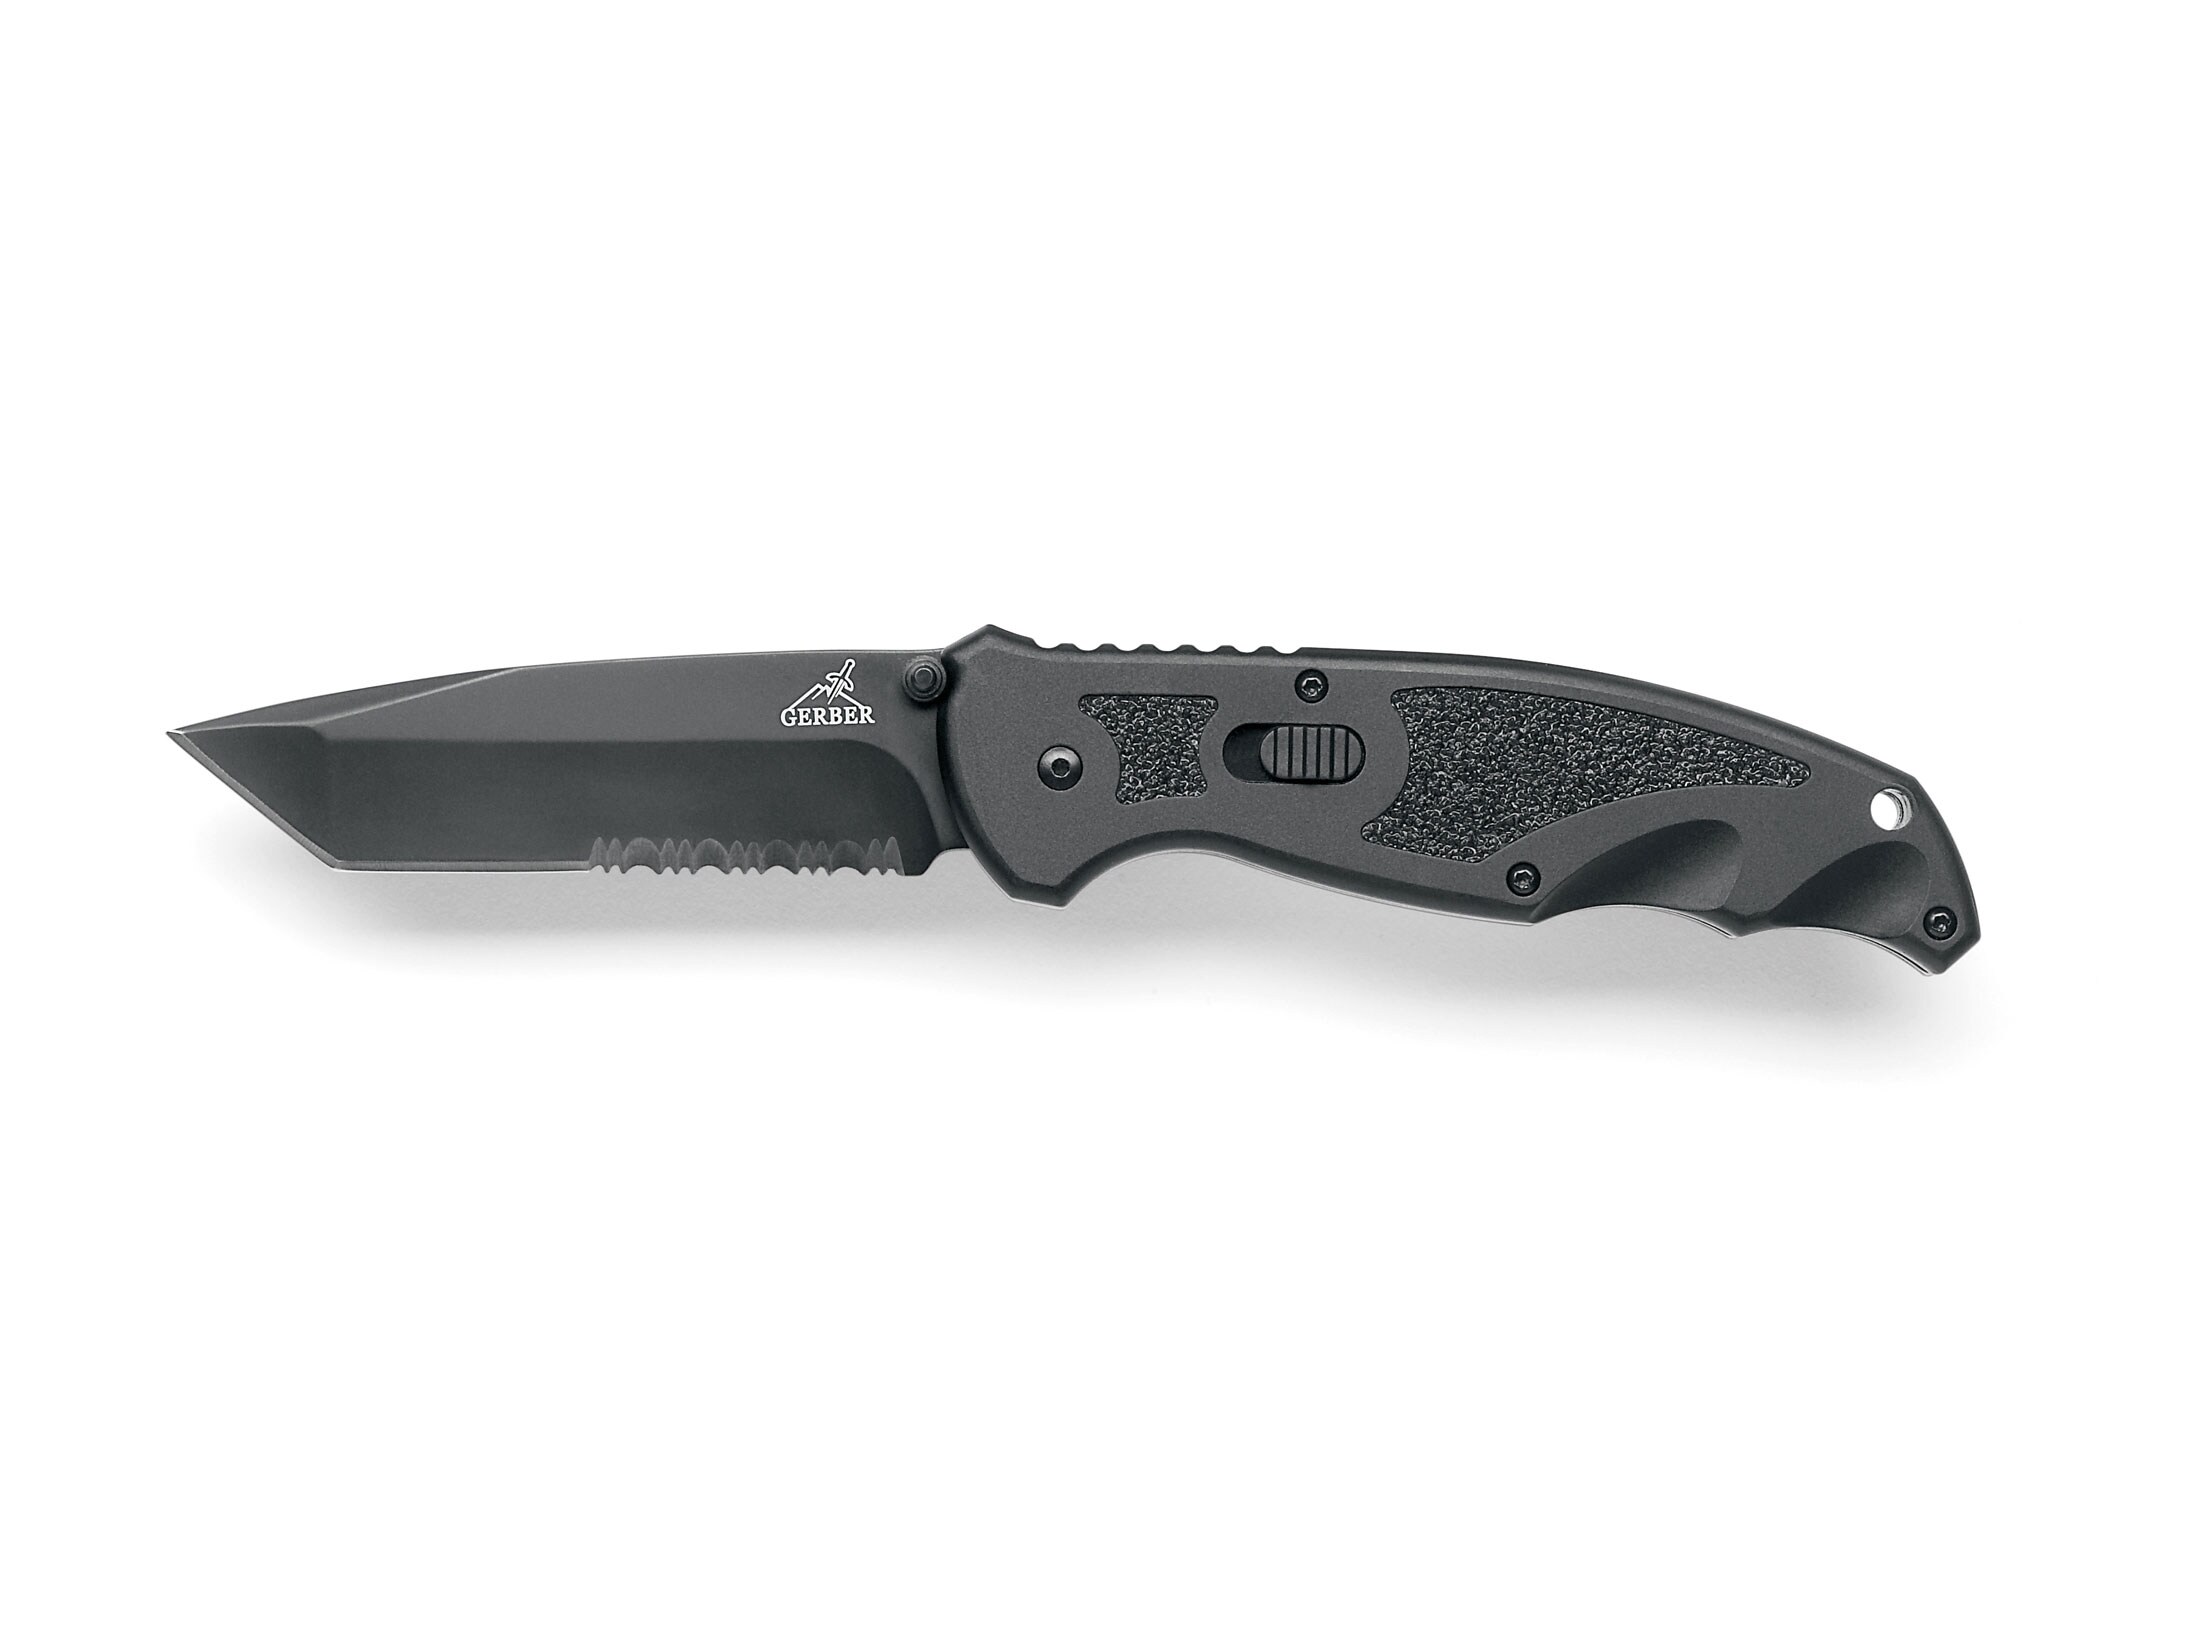 Gerber Answer F.A.S.T. Assisted Opening Folding Knife 3.3″ Serrated Tanto 7Cr17 Black Stainless Steel Blade Aluminum Handle Black For Sale